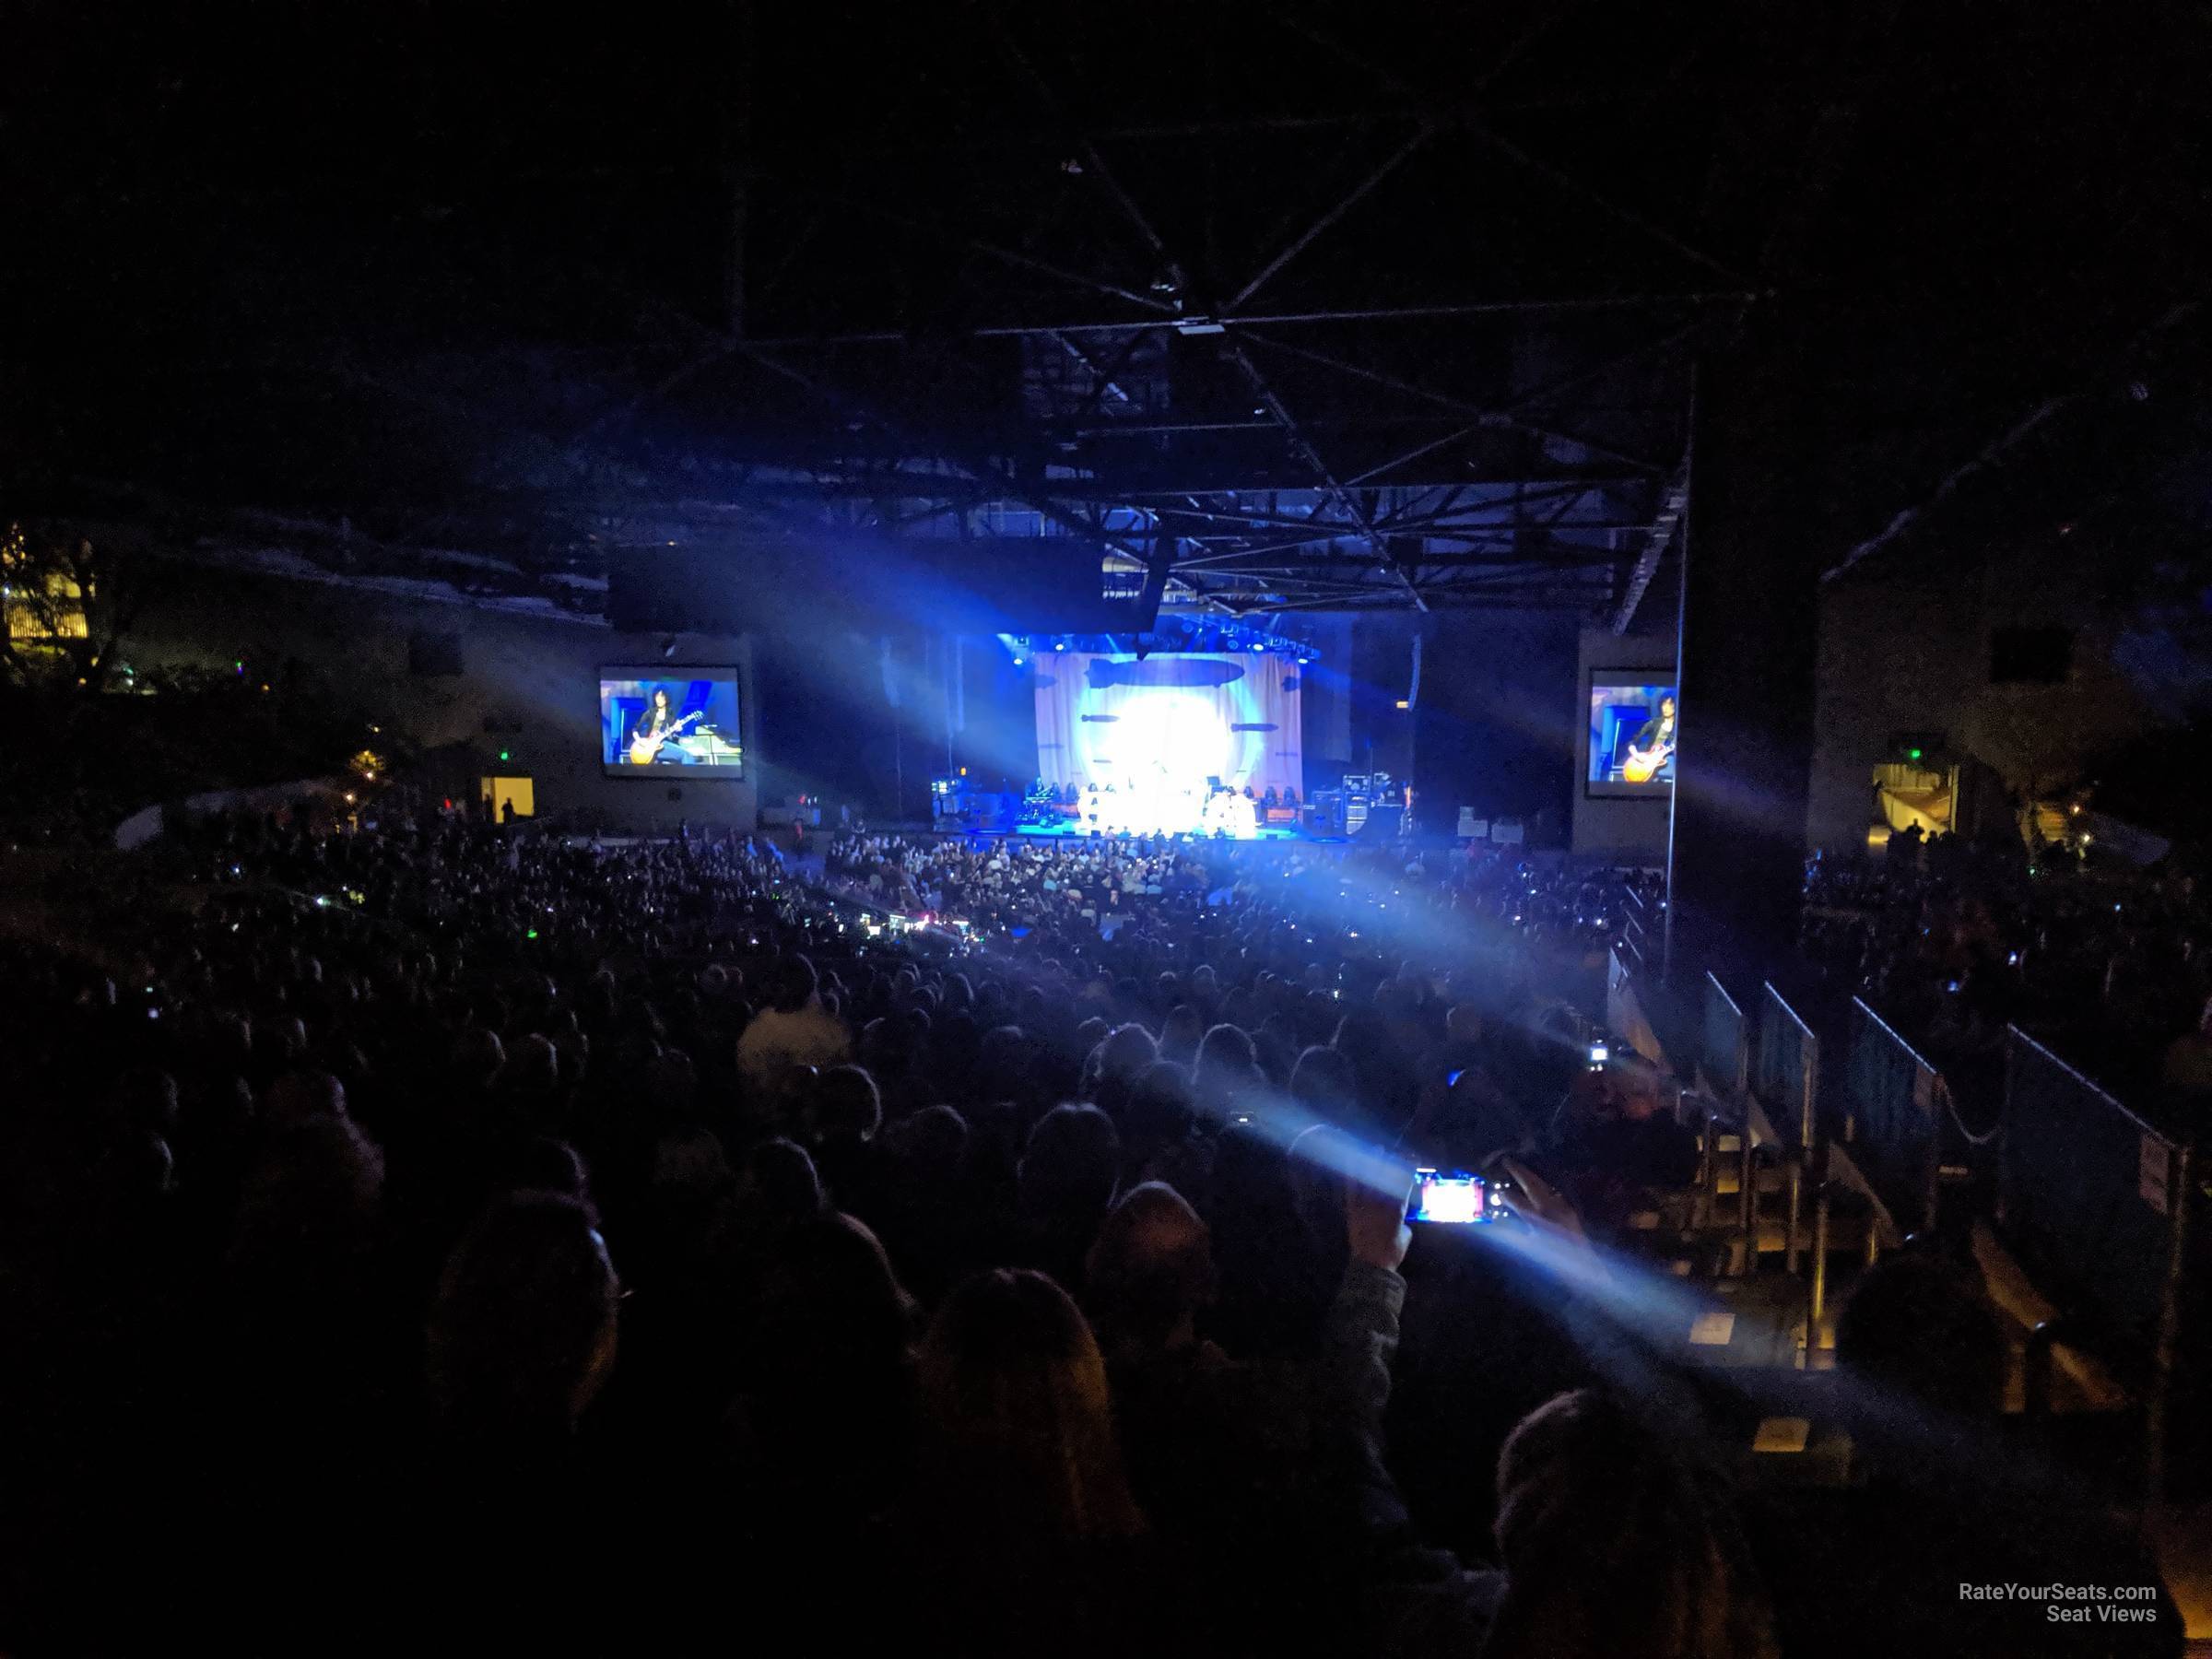 section 204, row x seat view  - concord pavilion